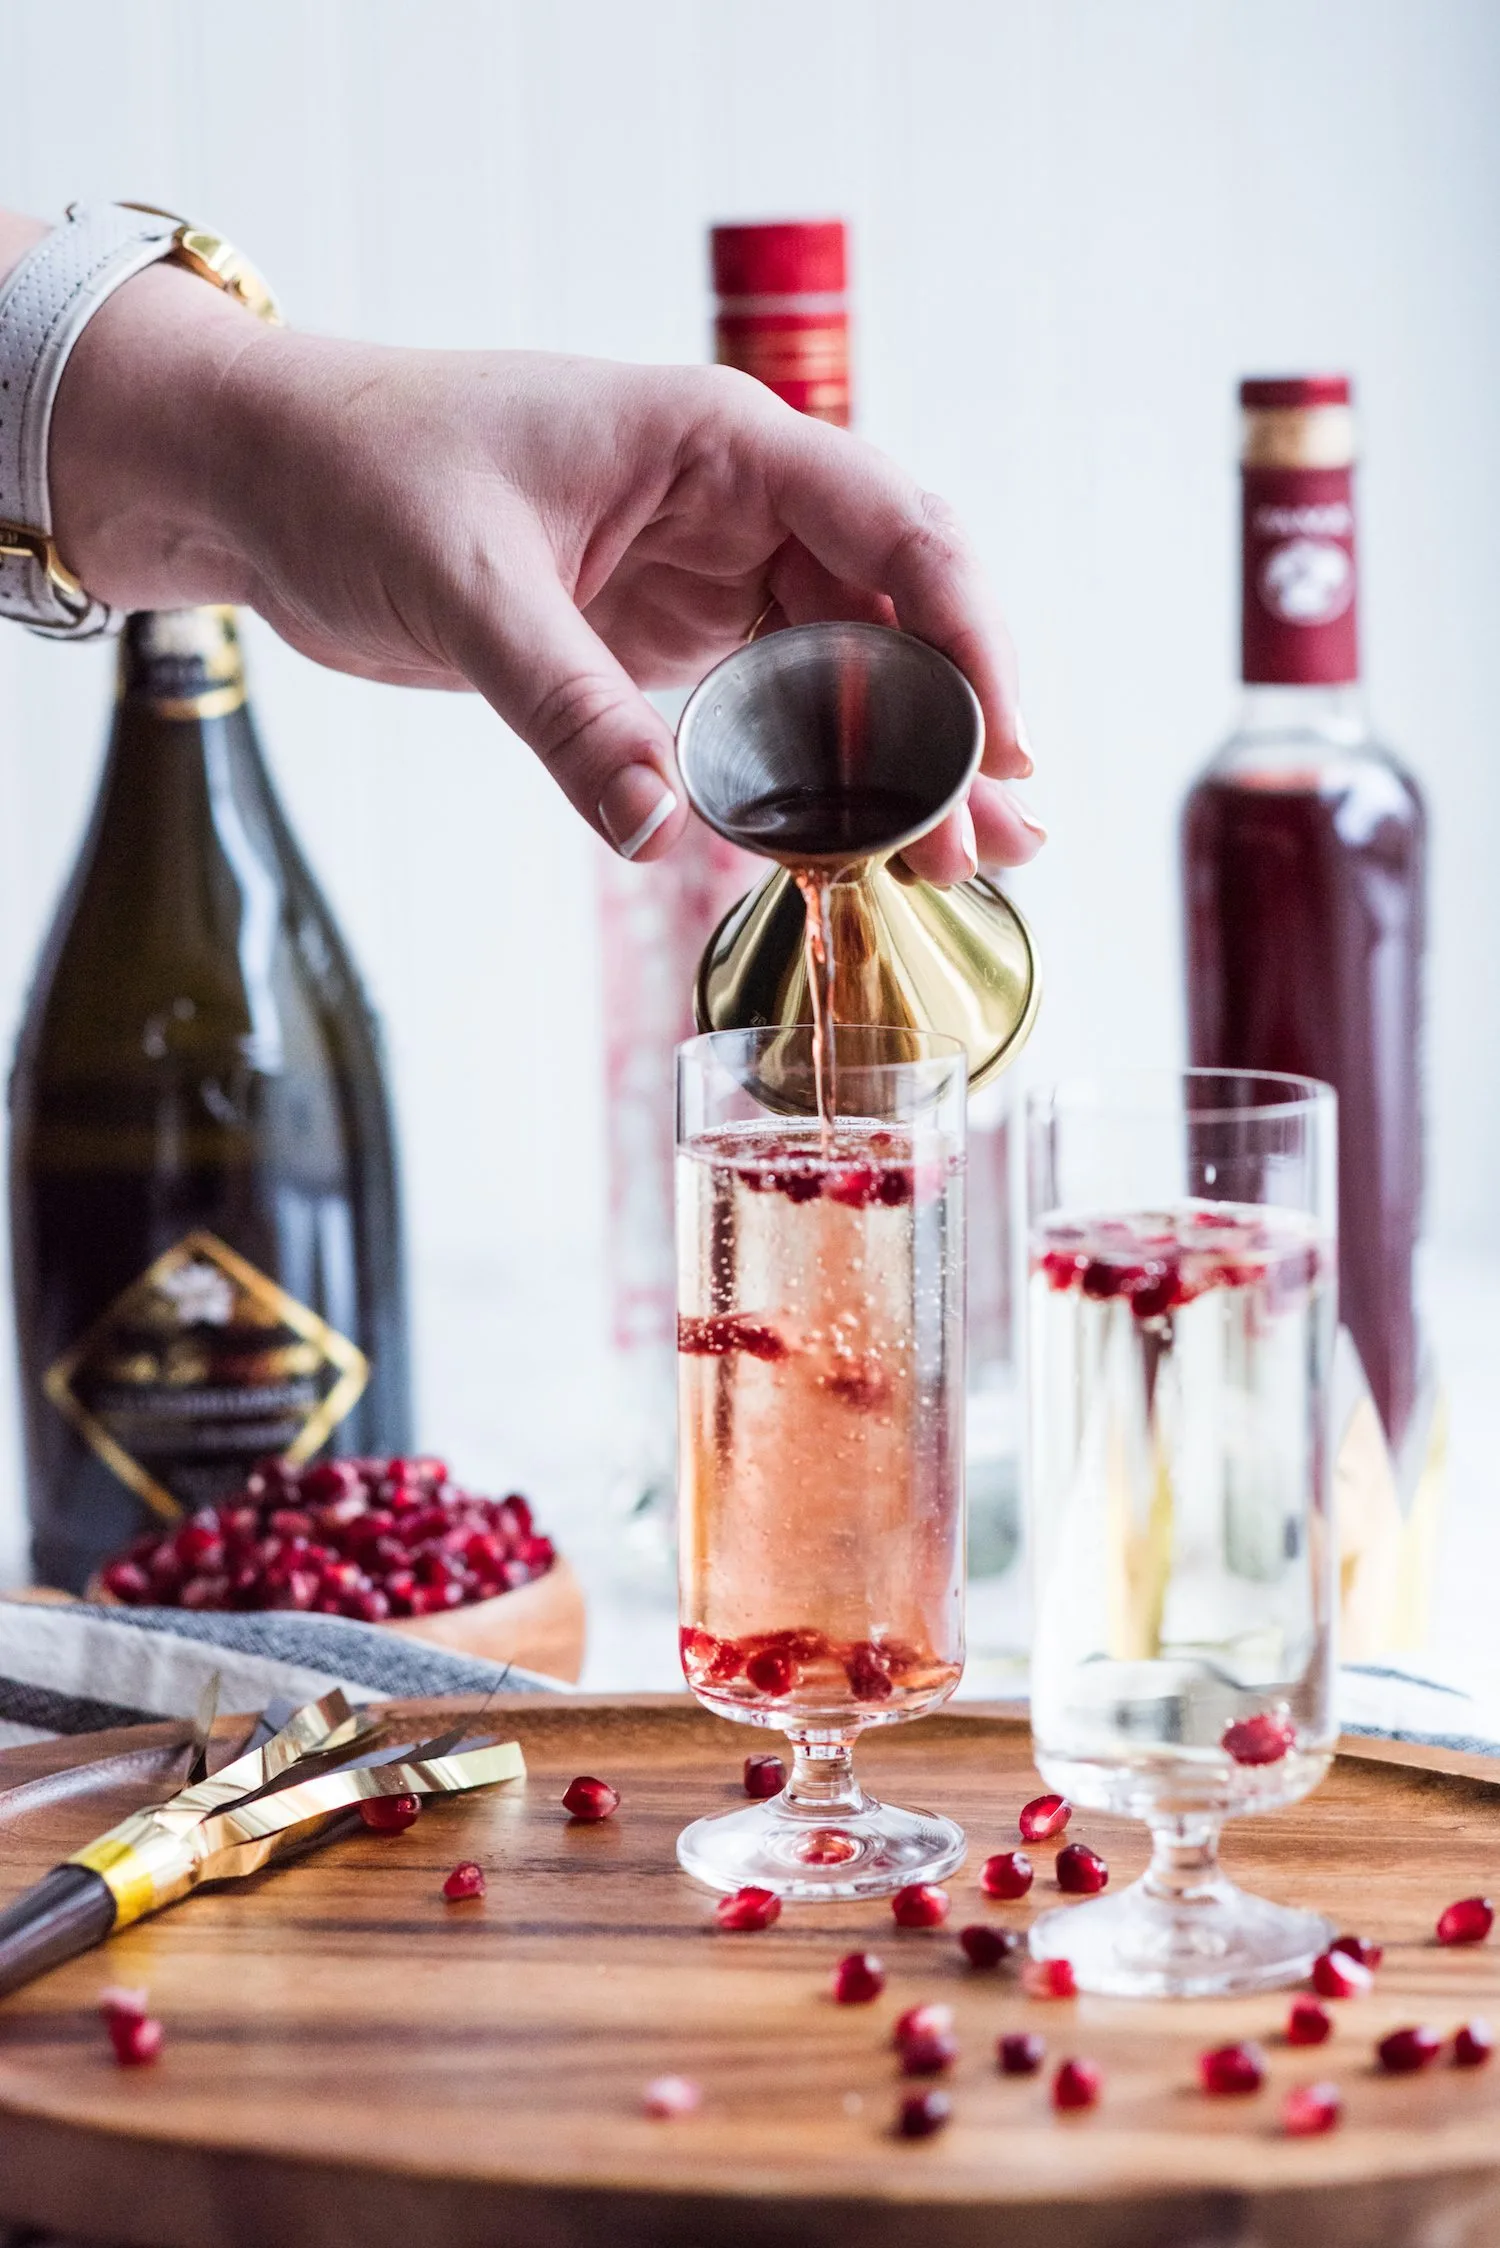 Sparkling Pomegranate French 75 Recipe | New Year's Eve cocktail recipes, entertaining tips, New Year's Eve party ideas and more from @cydconverse